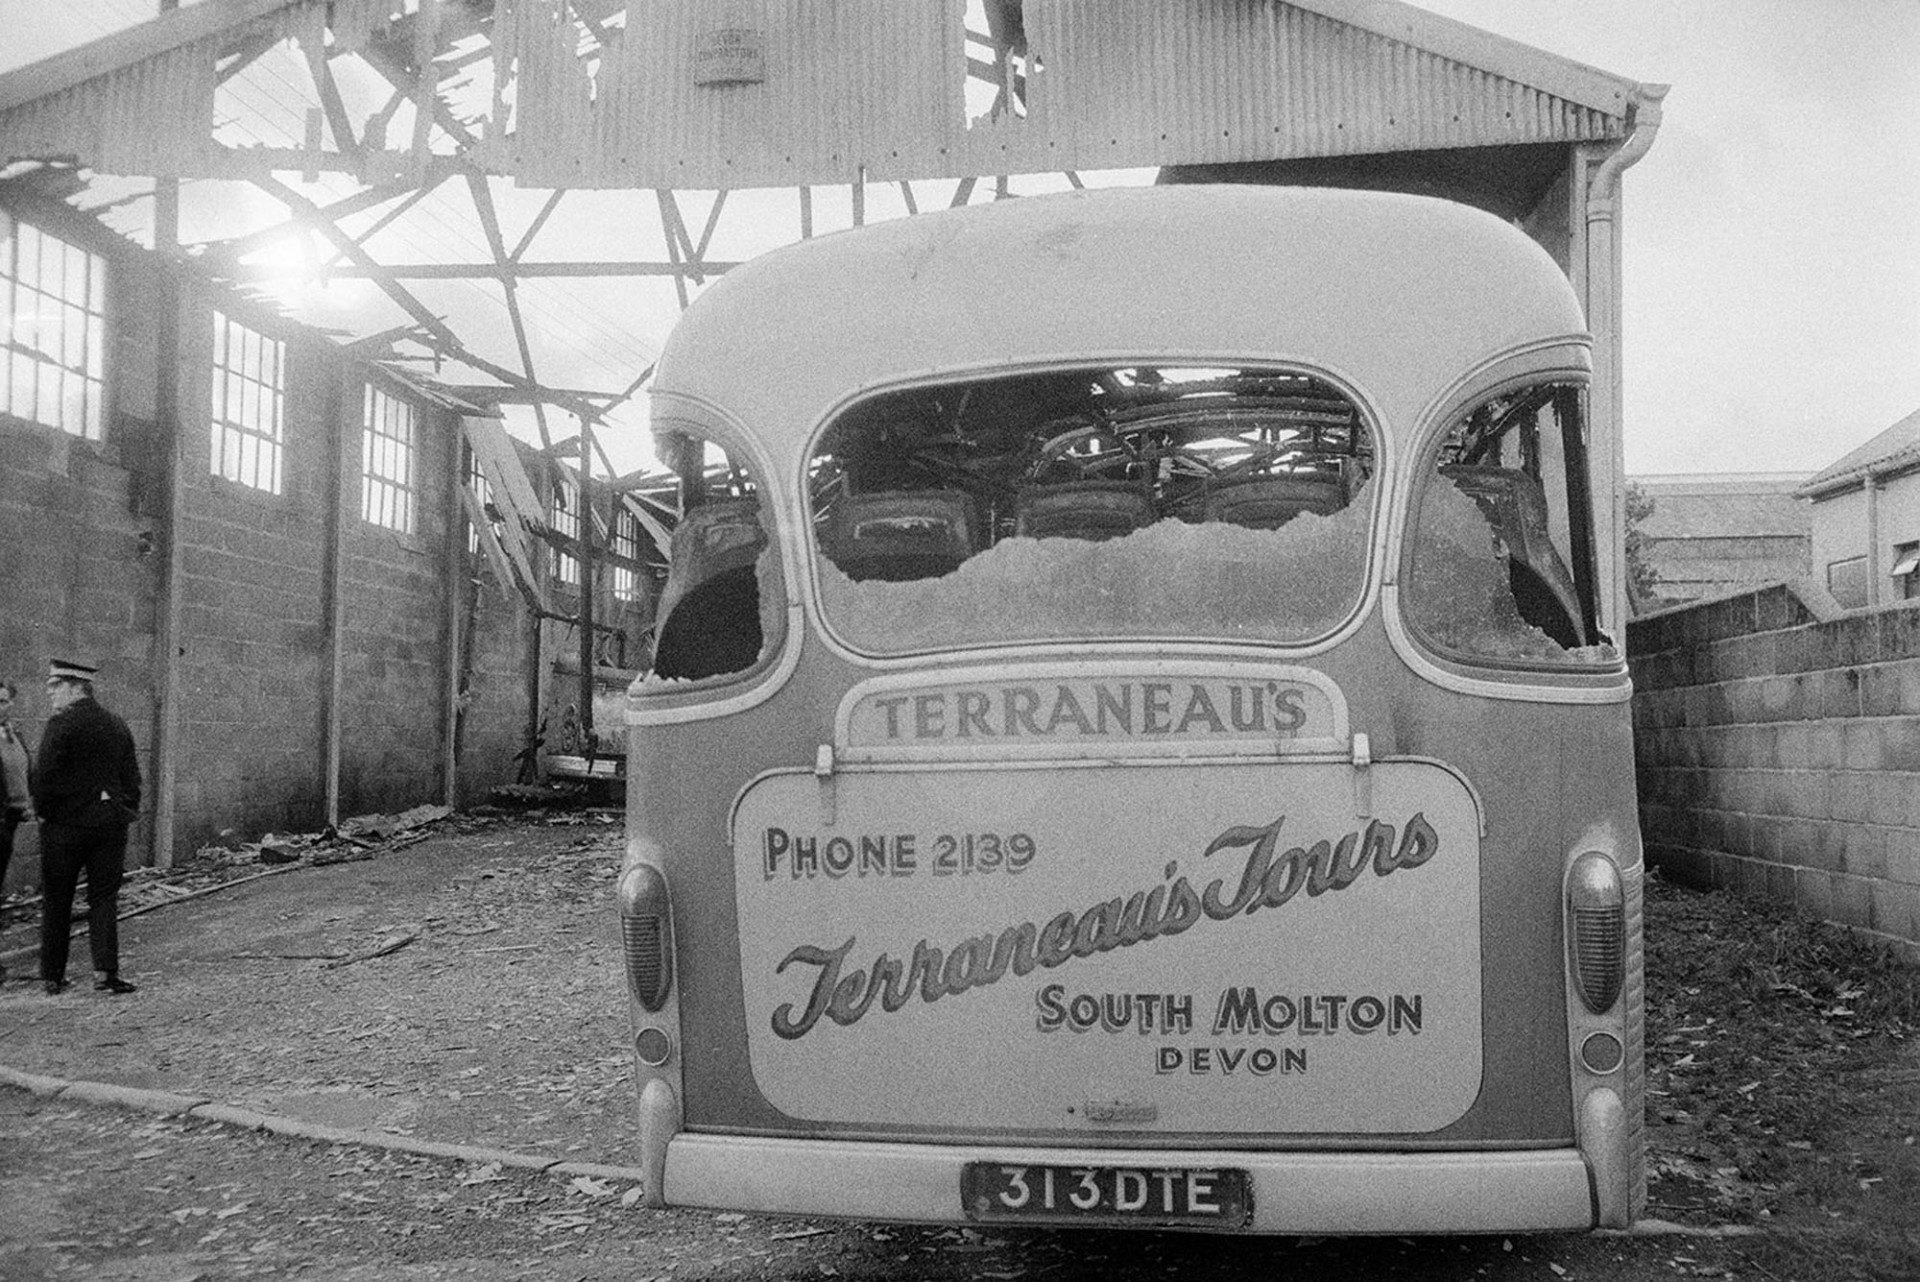 A Terraneau's Tours bus with smashed windows in a burnt out bus depot at South Molton. A policeman and man are talking in the foreground.